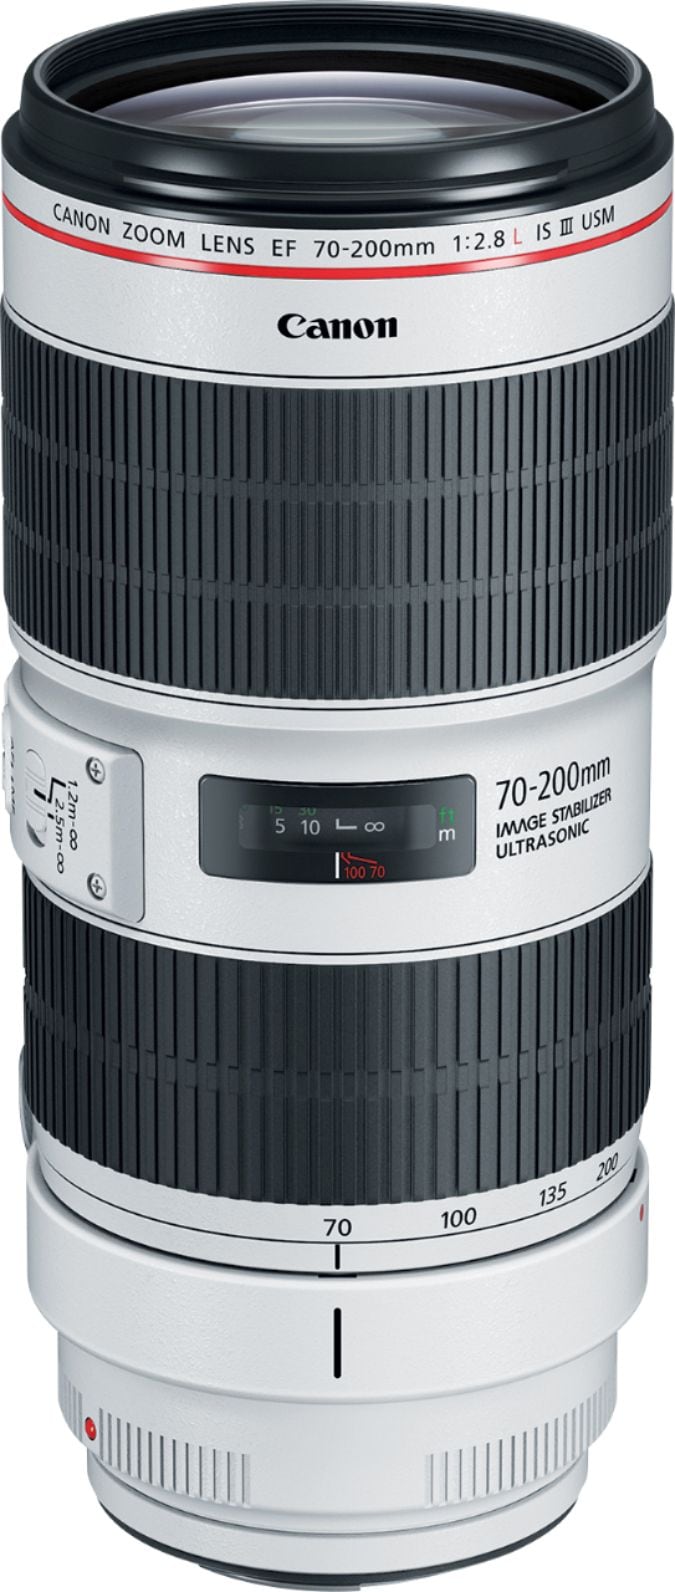 Canon - EF 70-200mm f/2.8L IS III USM Optical Telephoto Zoom Lens for DSLRs_0